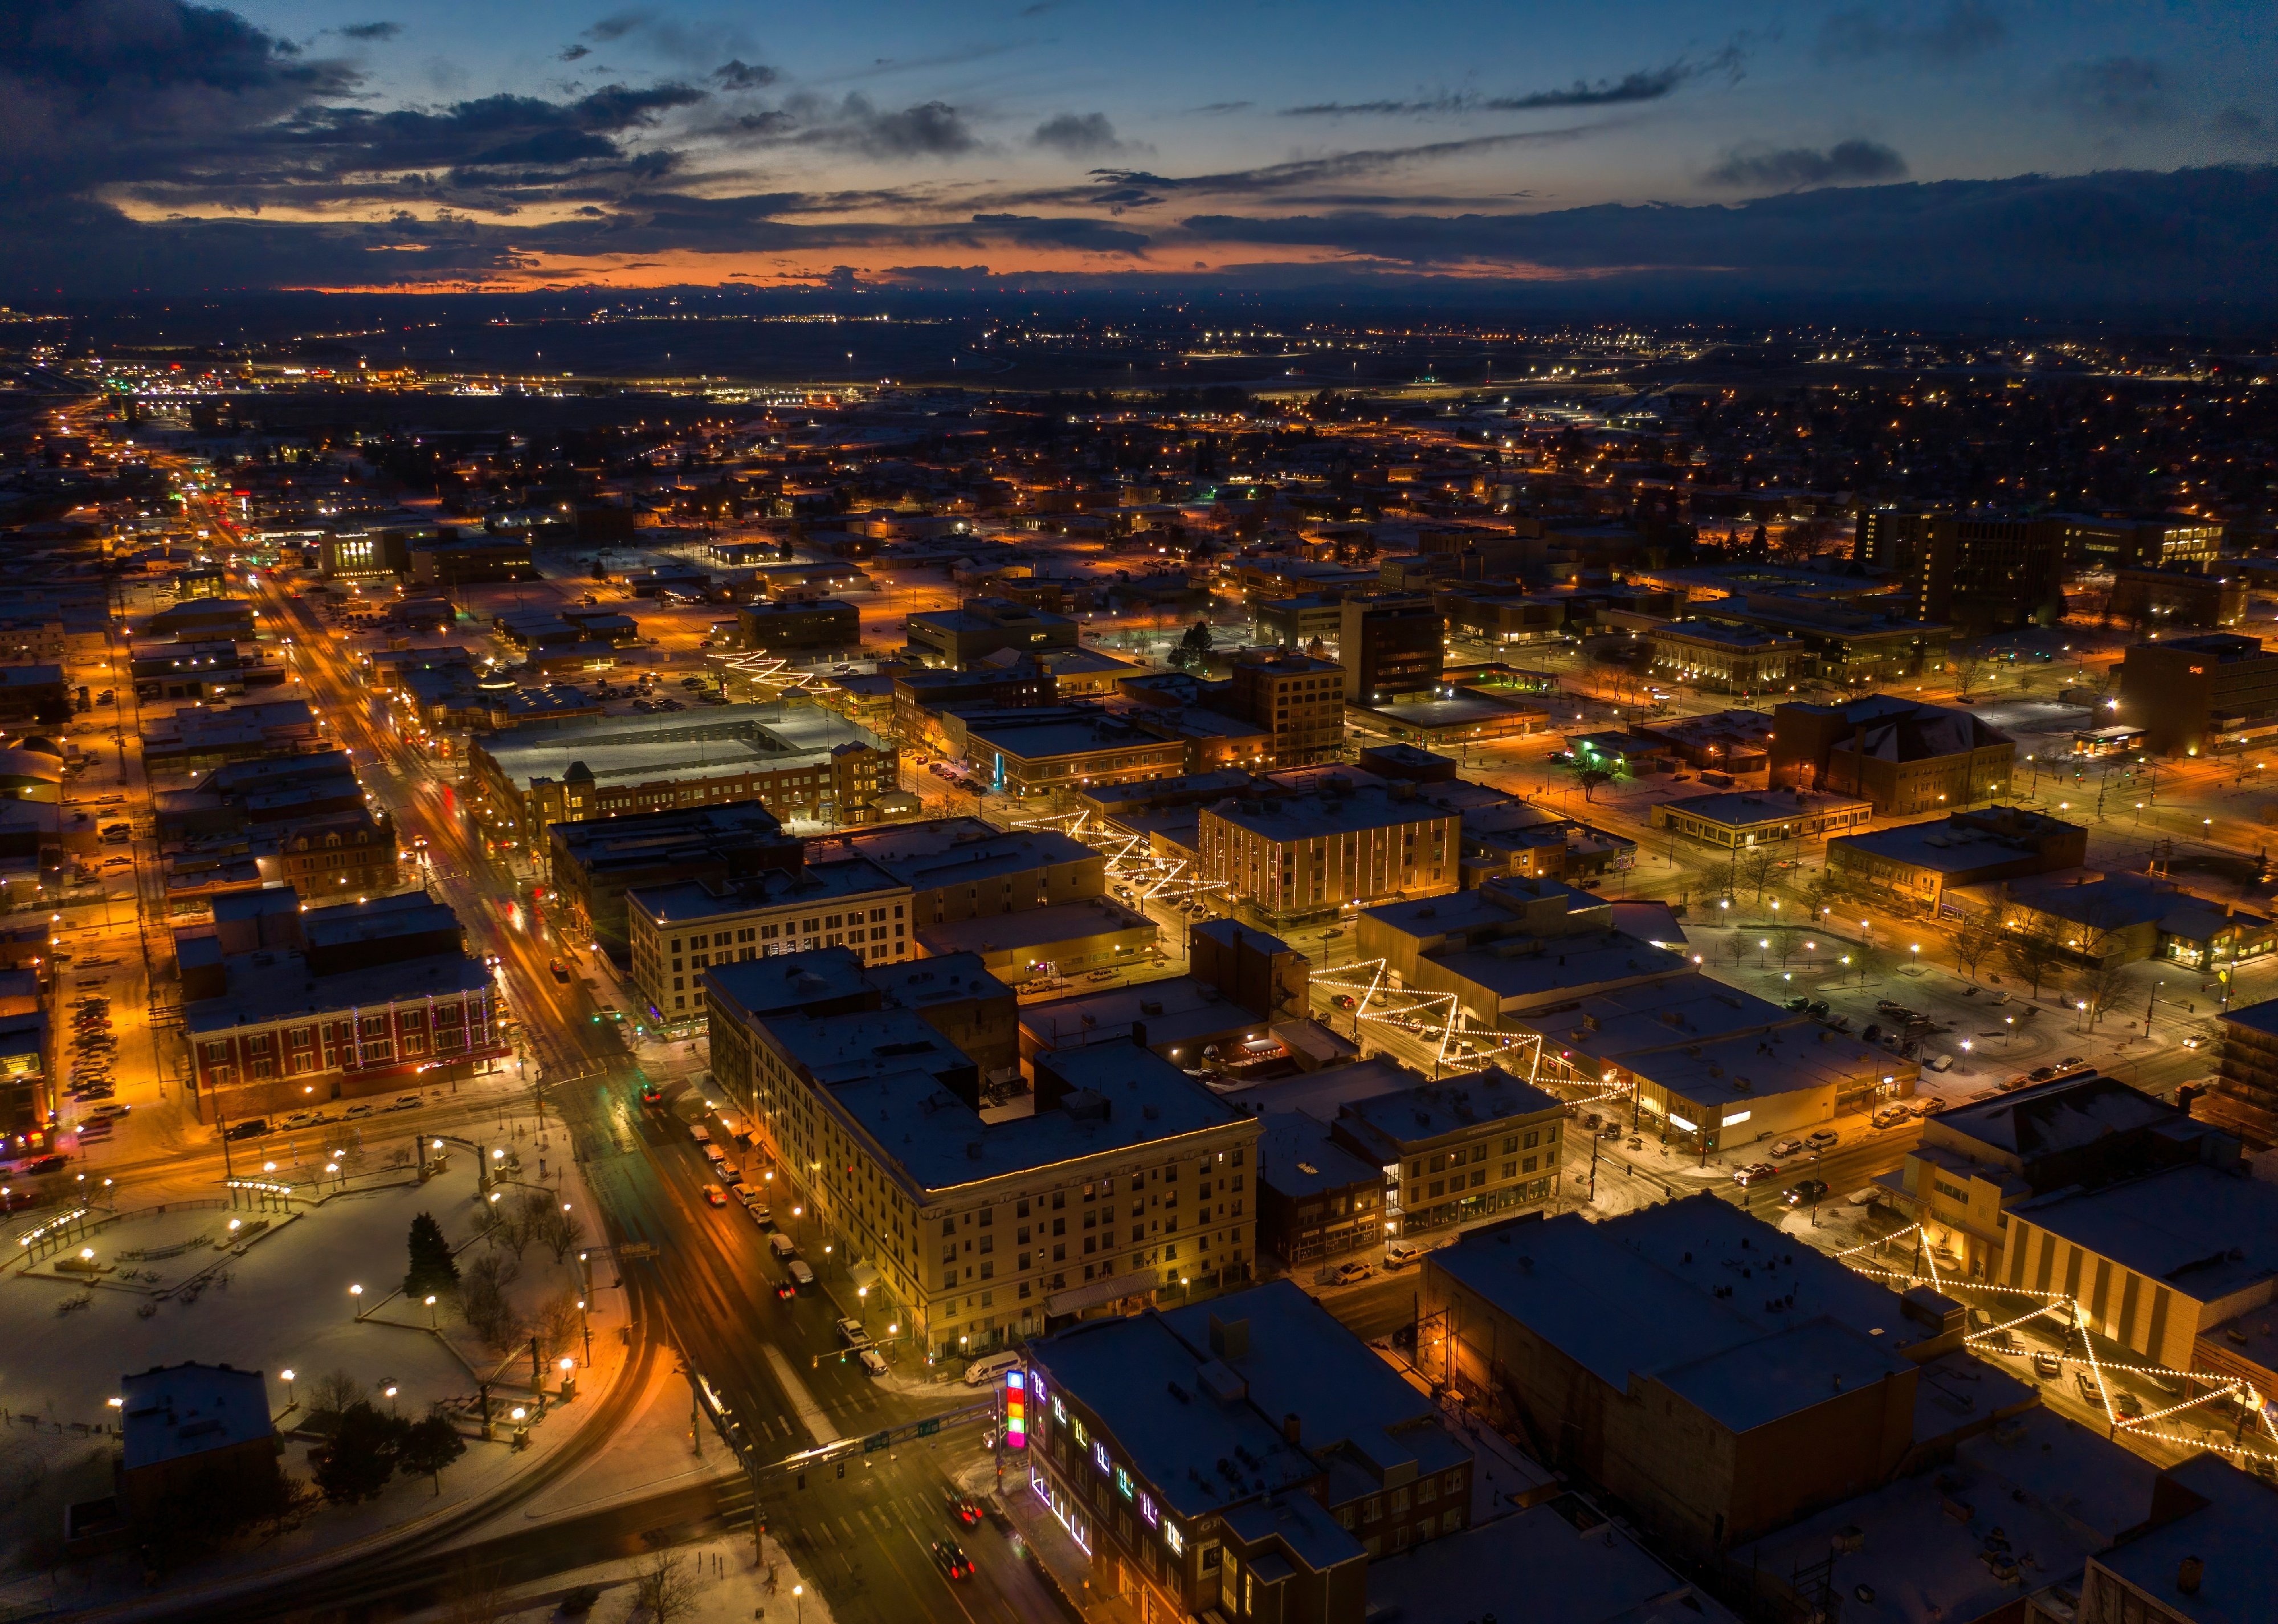 Aerial view of Cheyenne at dusk during winter.